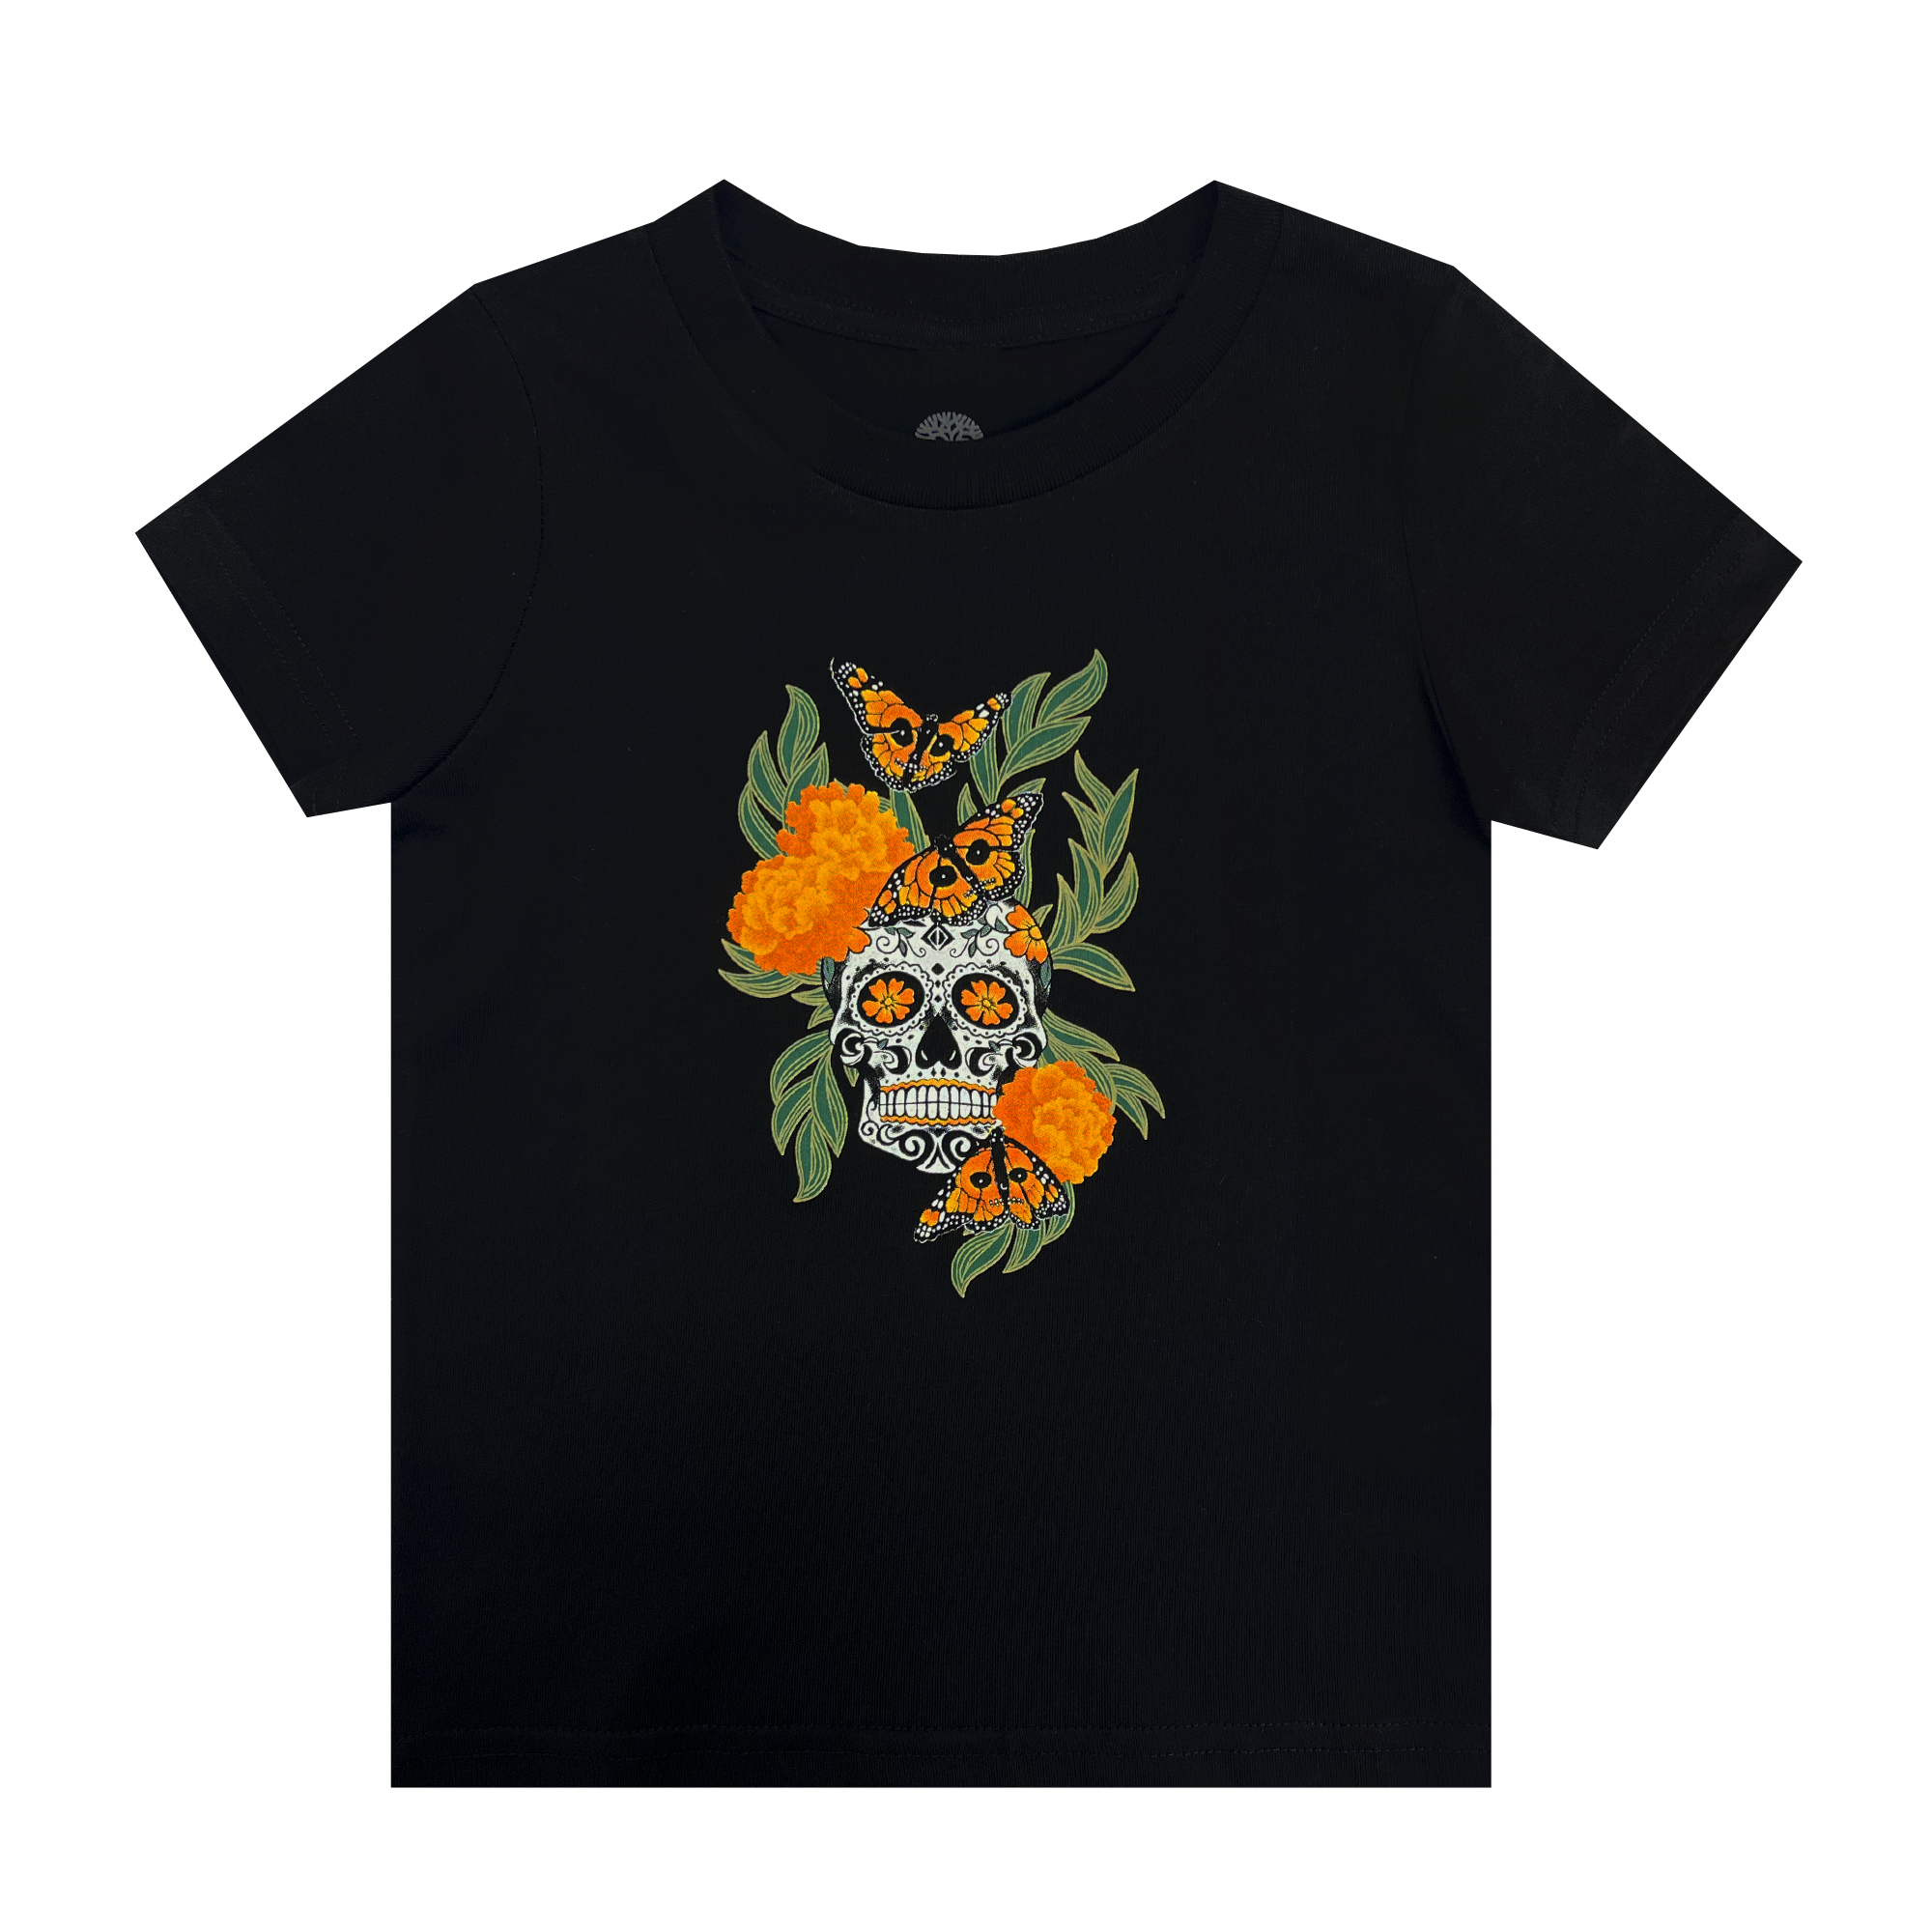 Black youth t-shirt with graphic art by Oakland artist Jet Martinez depicting a sugar skull surrounded by Marigolds and Monarch butterflies.